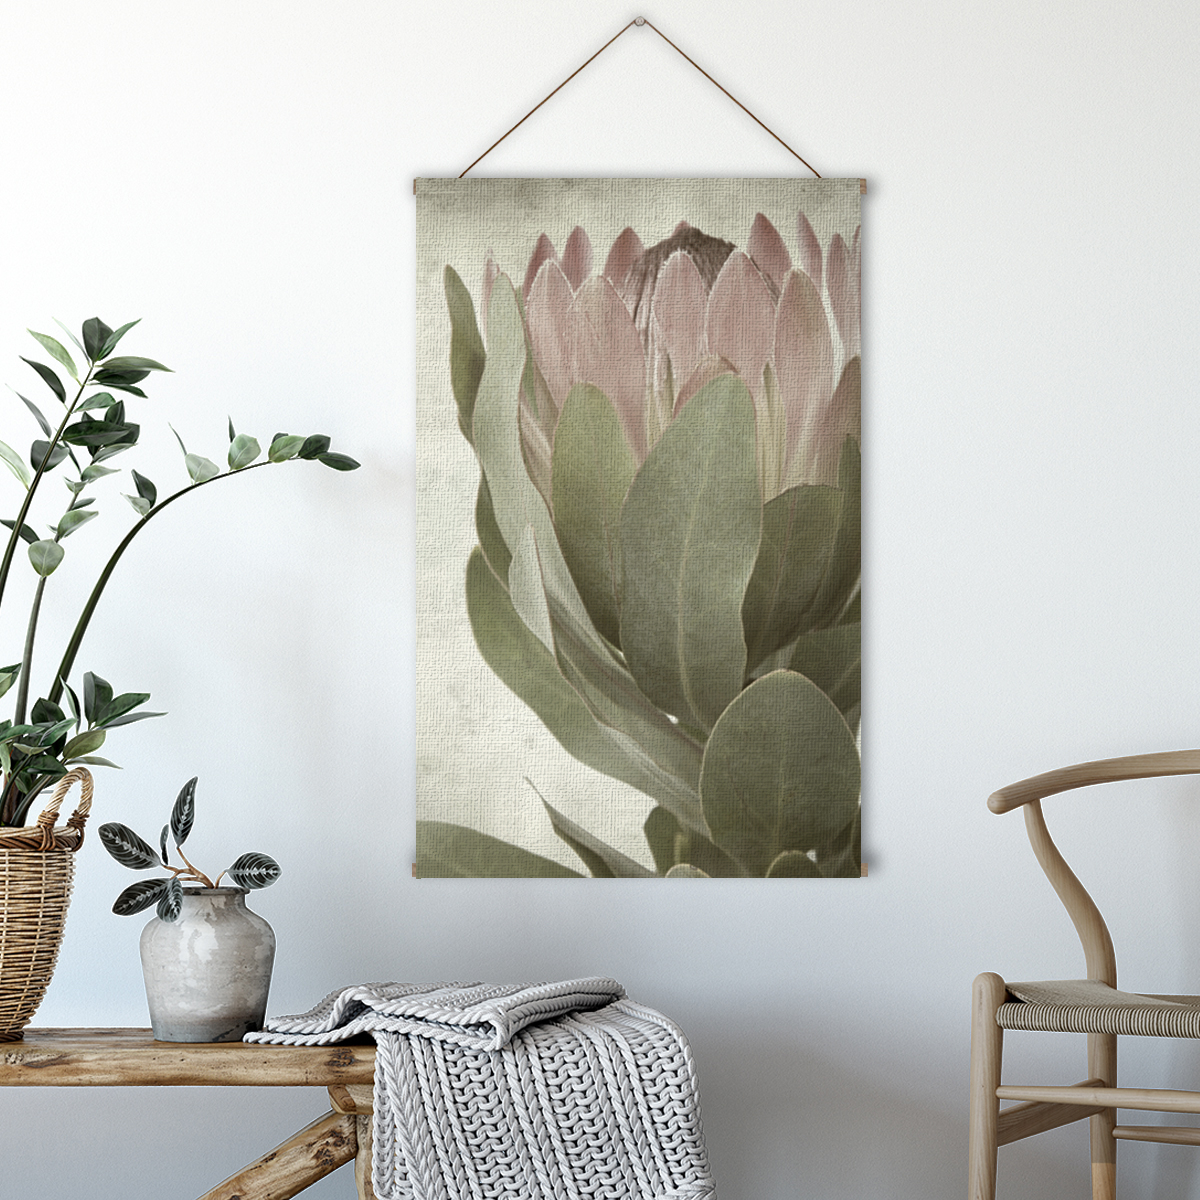 30% off on SmartArt Fabric Wall Hangings